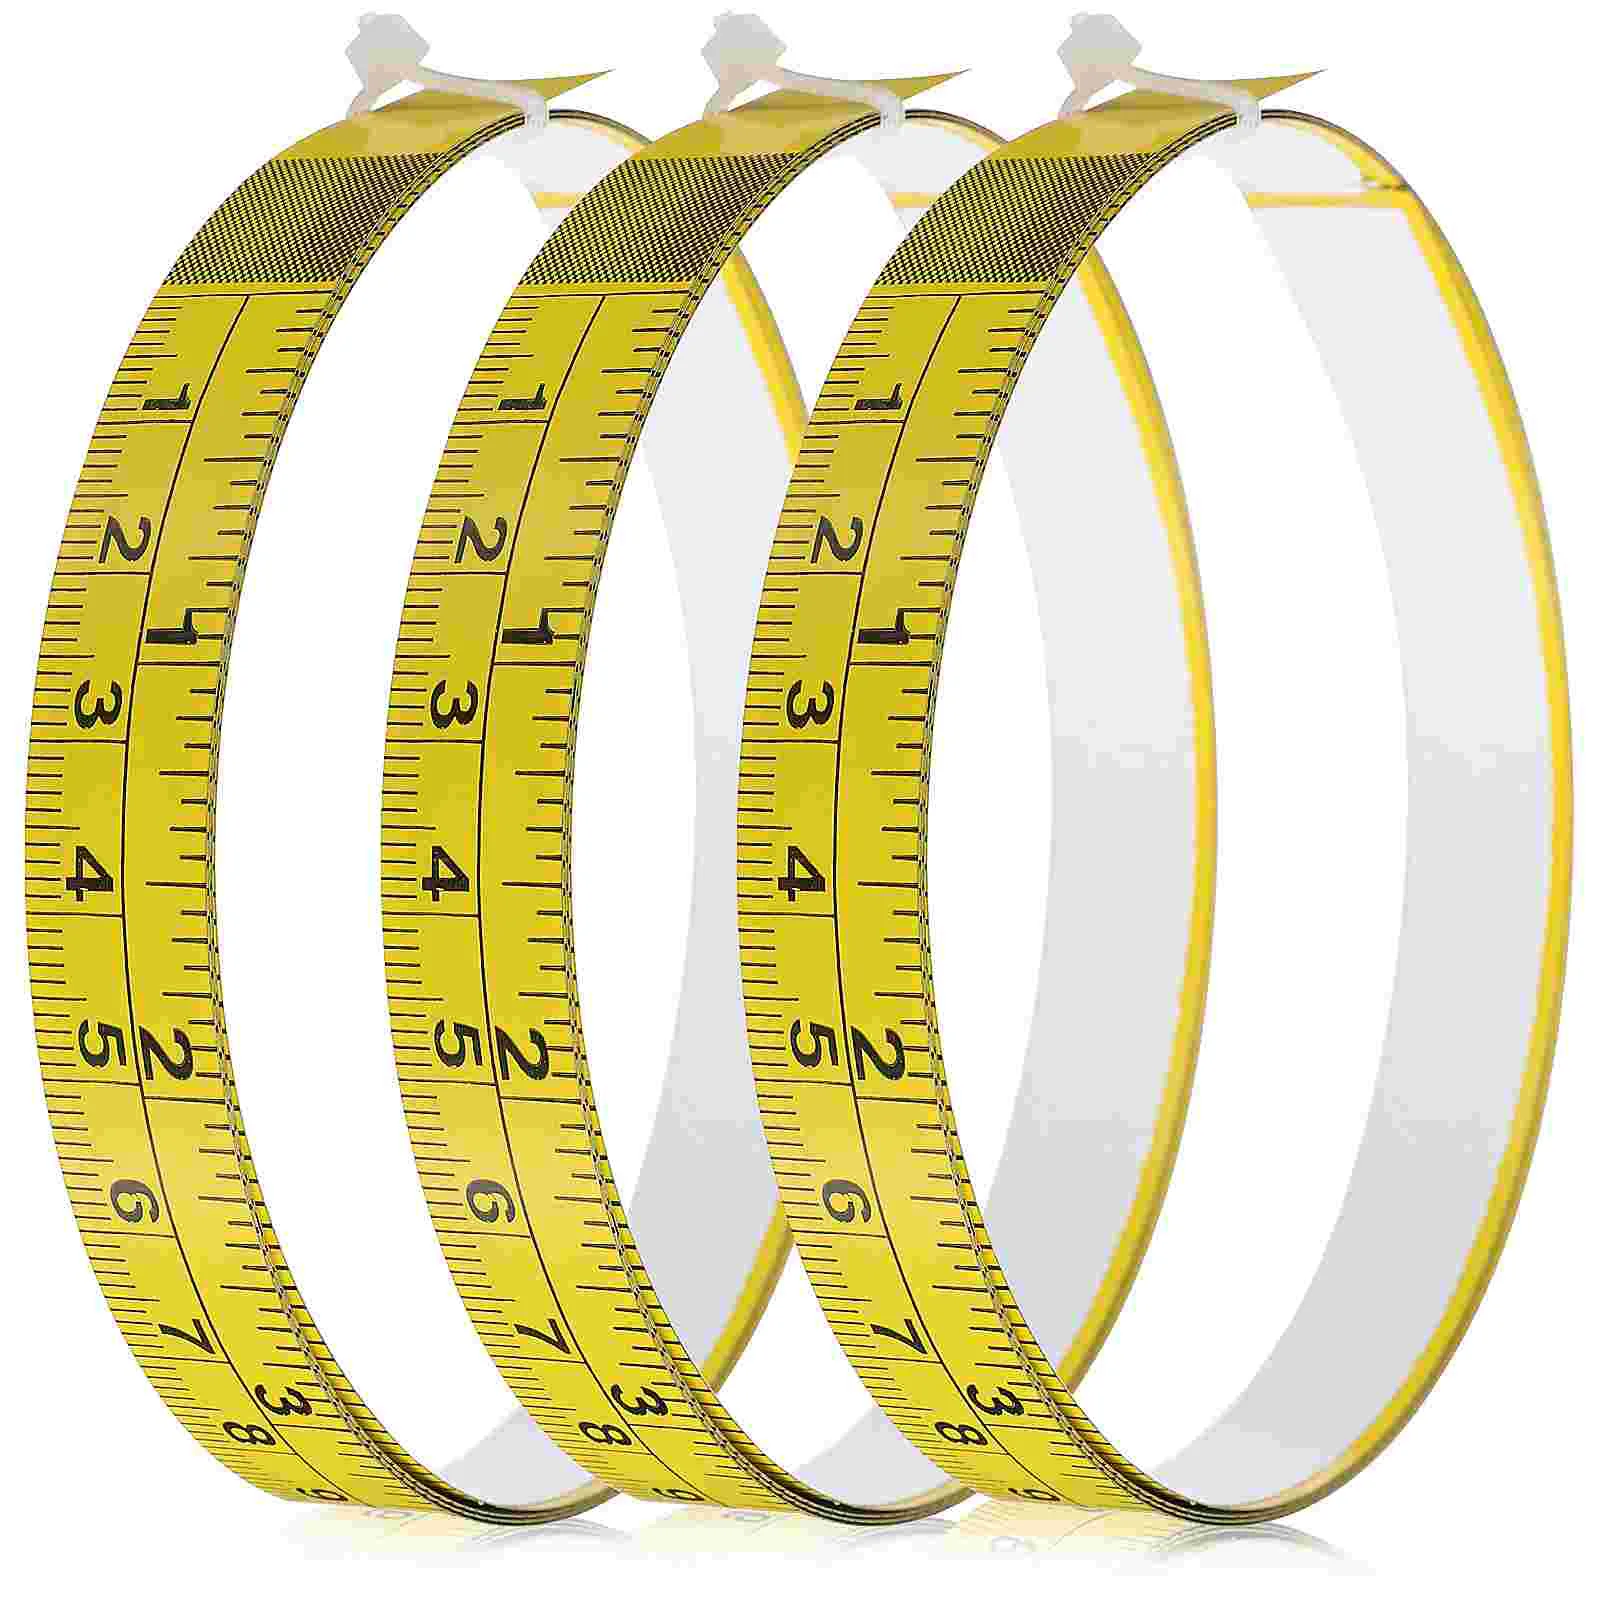 

3 Pcs Tape Ruler Metal Measure Adhesive Woodworking Sticky Measuring Tapes Long for Table